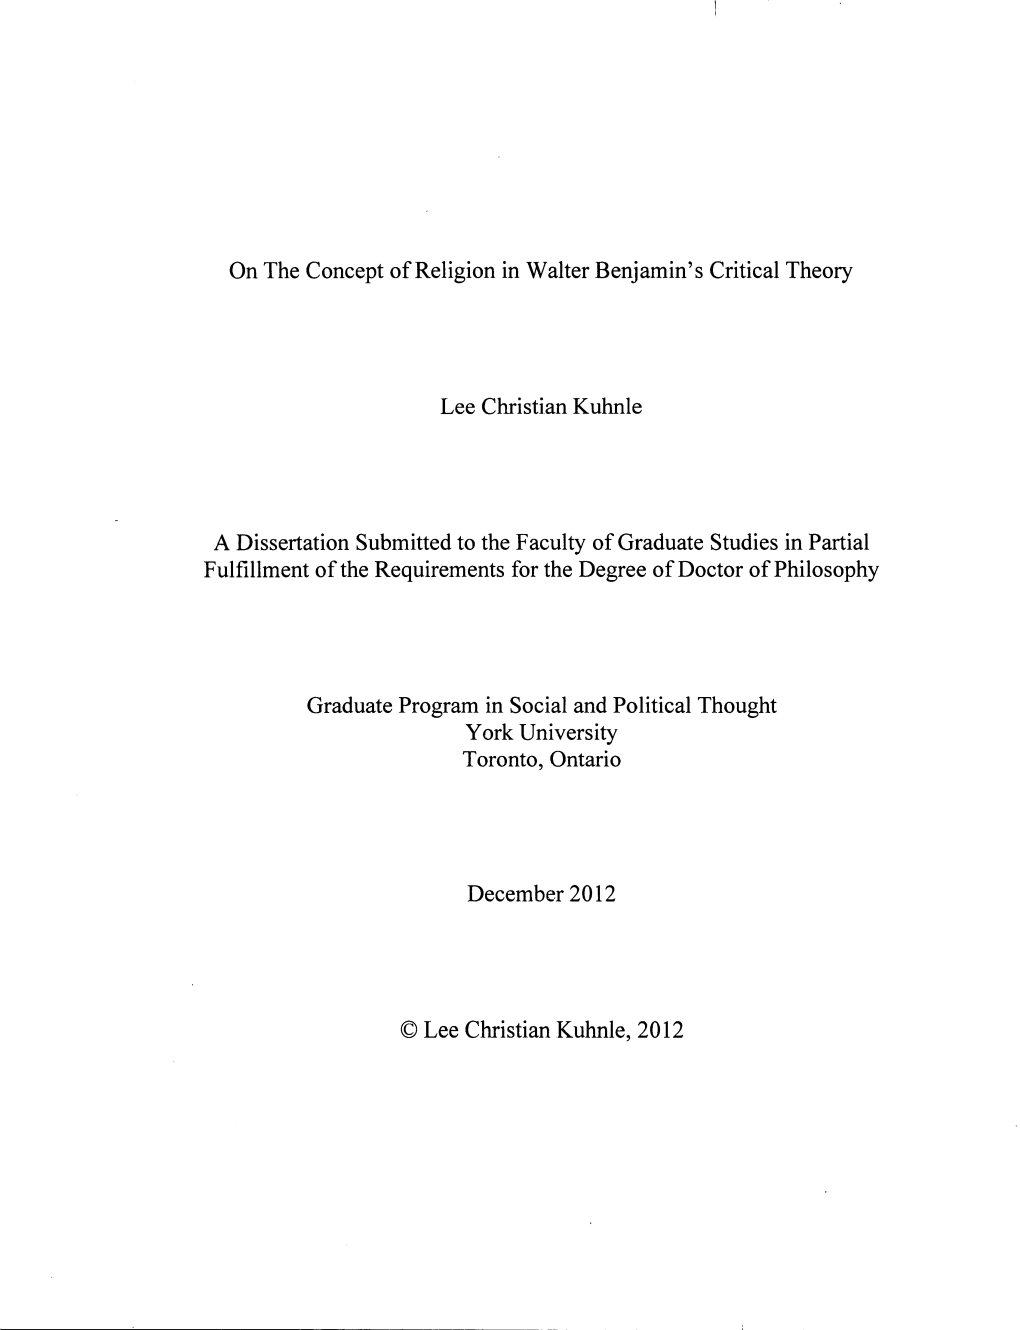 On the Concept of Religion in Walter Benjamin's Critical Theory